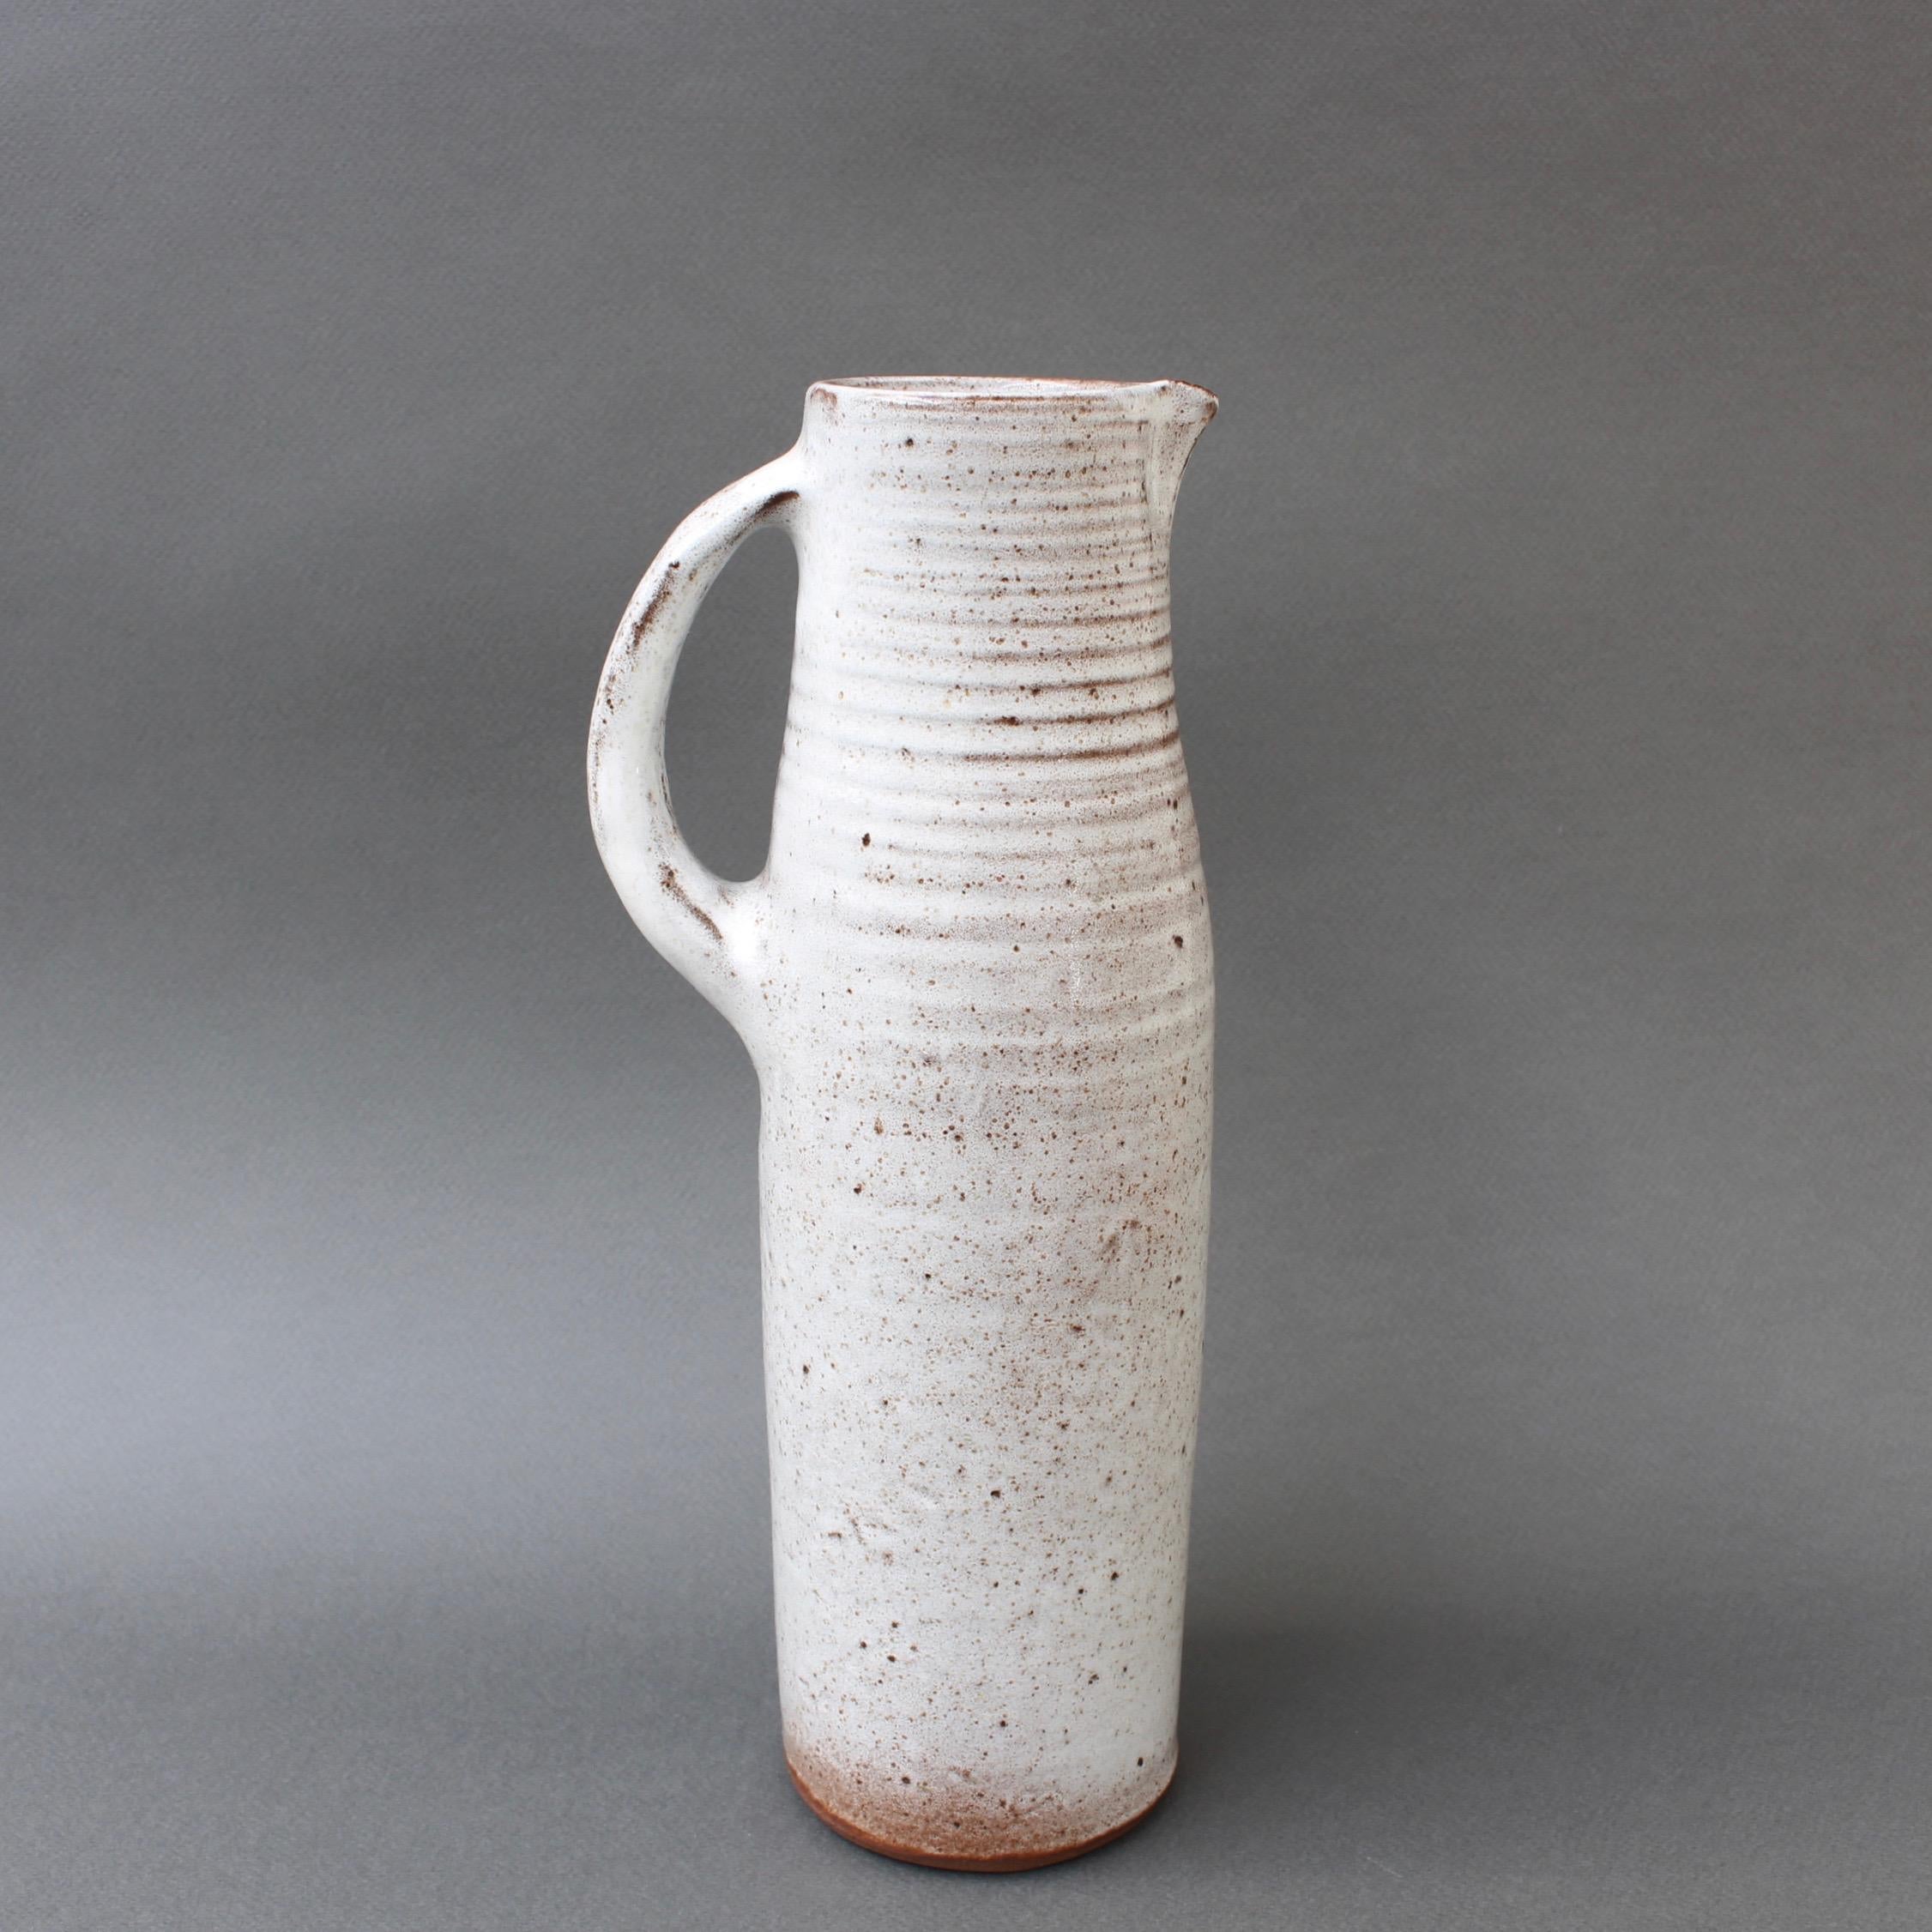 Midcentury French ceramic vase / jug by Jeanne & Norbert Pierlot (circa 1960s). With an off-white base and sandstone accents, this elongated and elegant vase with handle and spout is a delight. The glazed parts that are predominantly white are